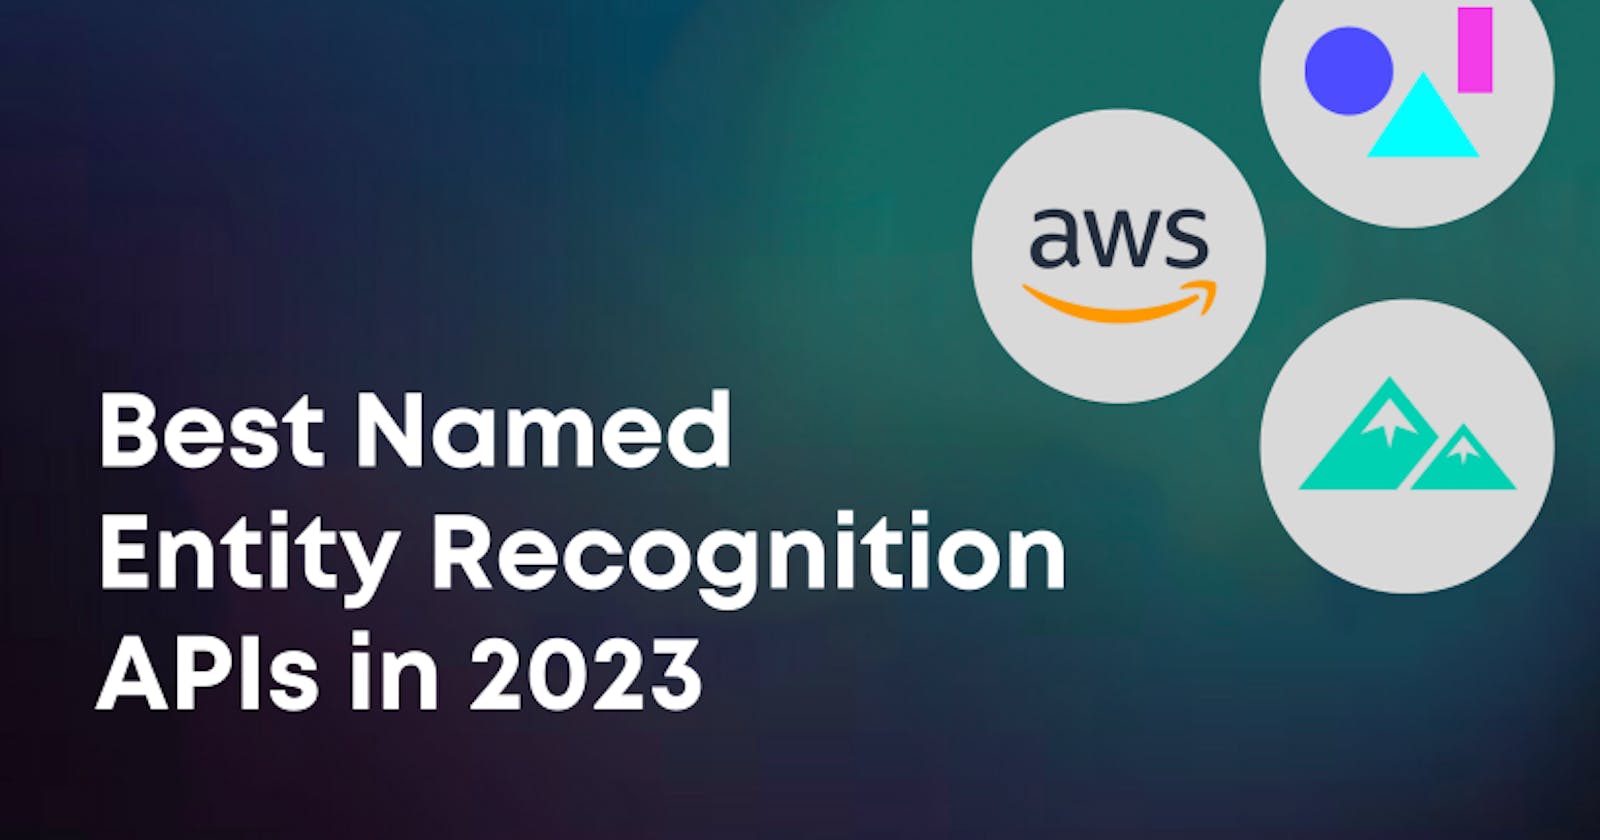 Best Named Entity Recognition APIs in 2023